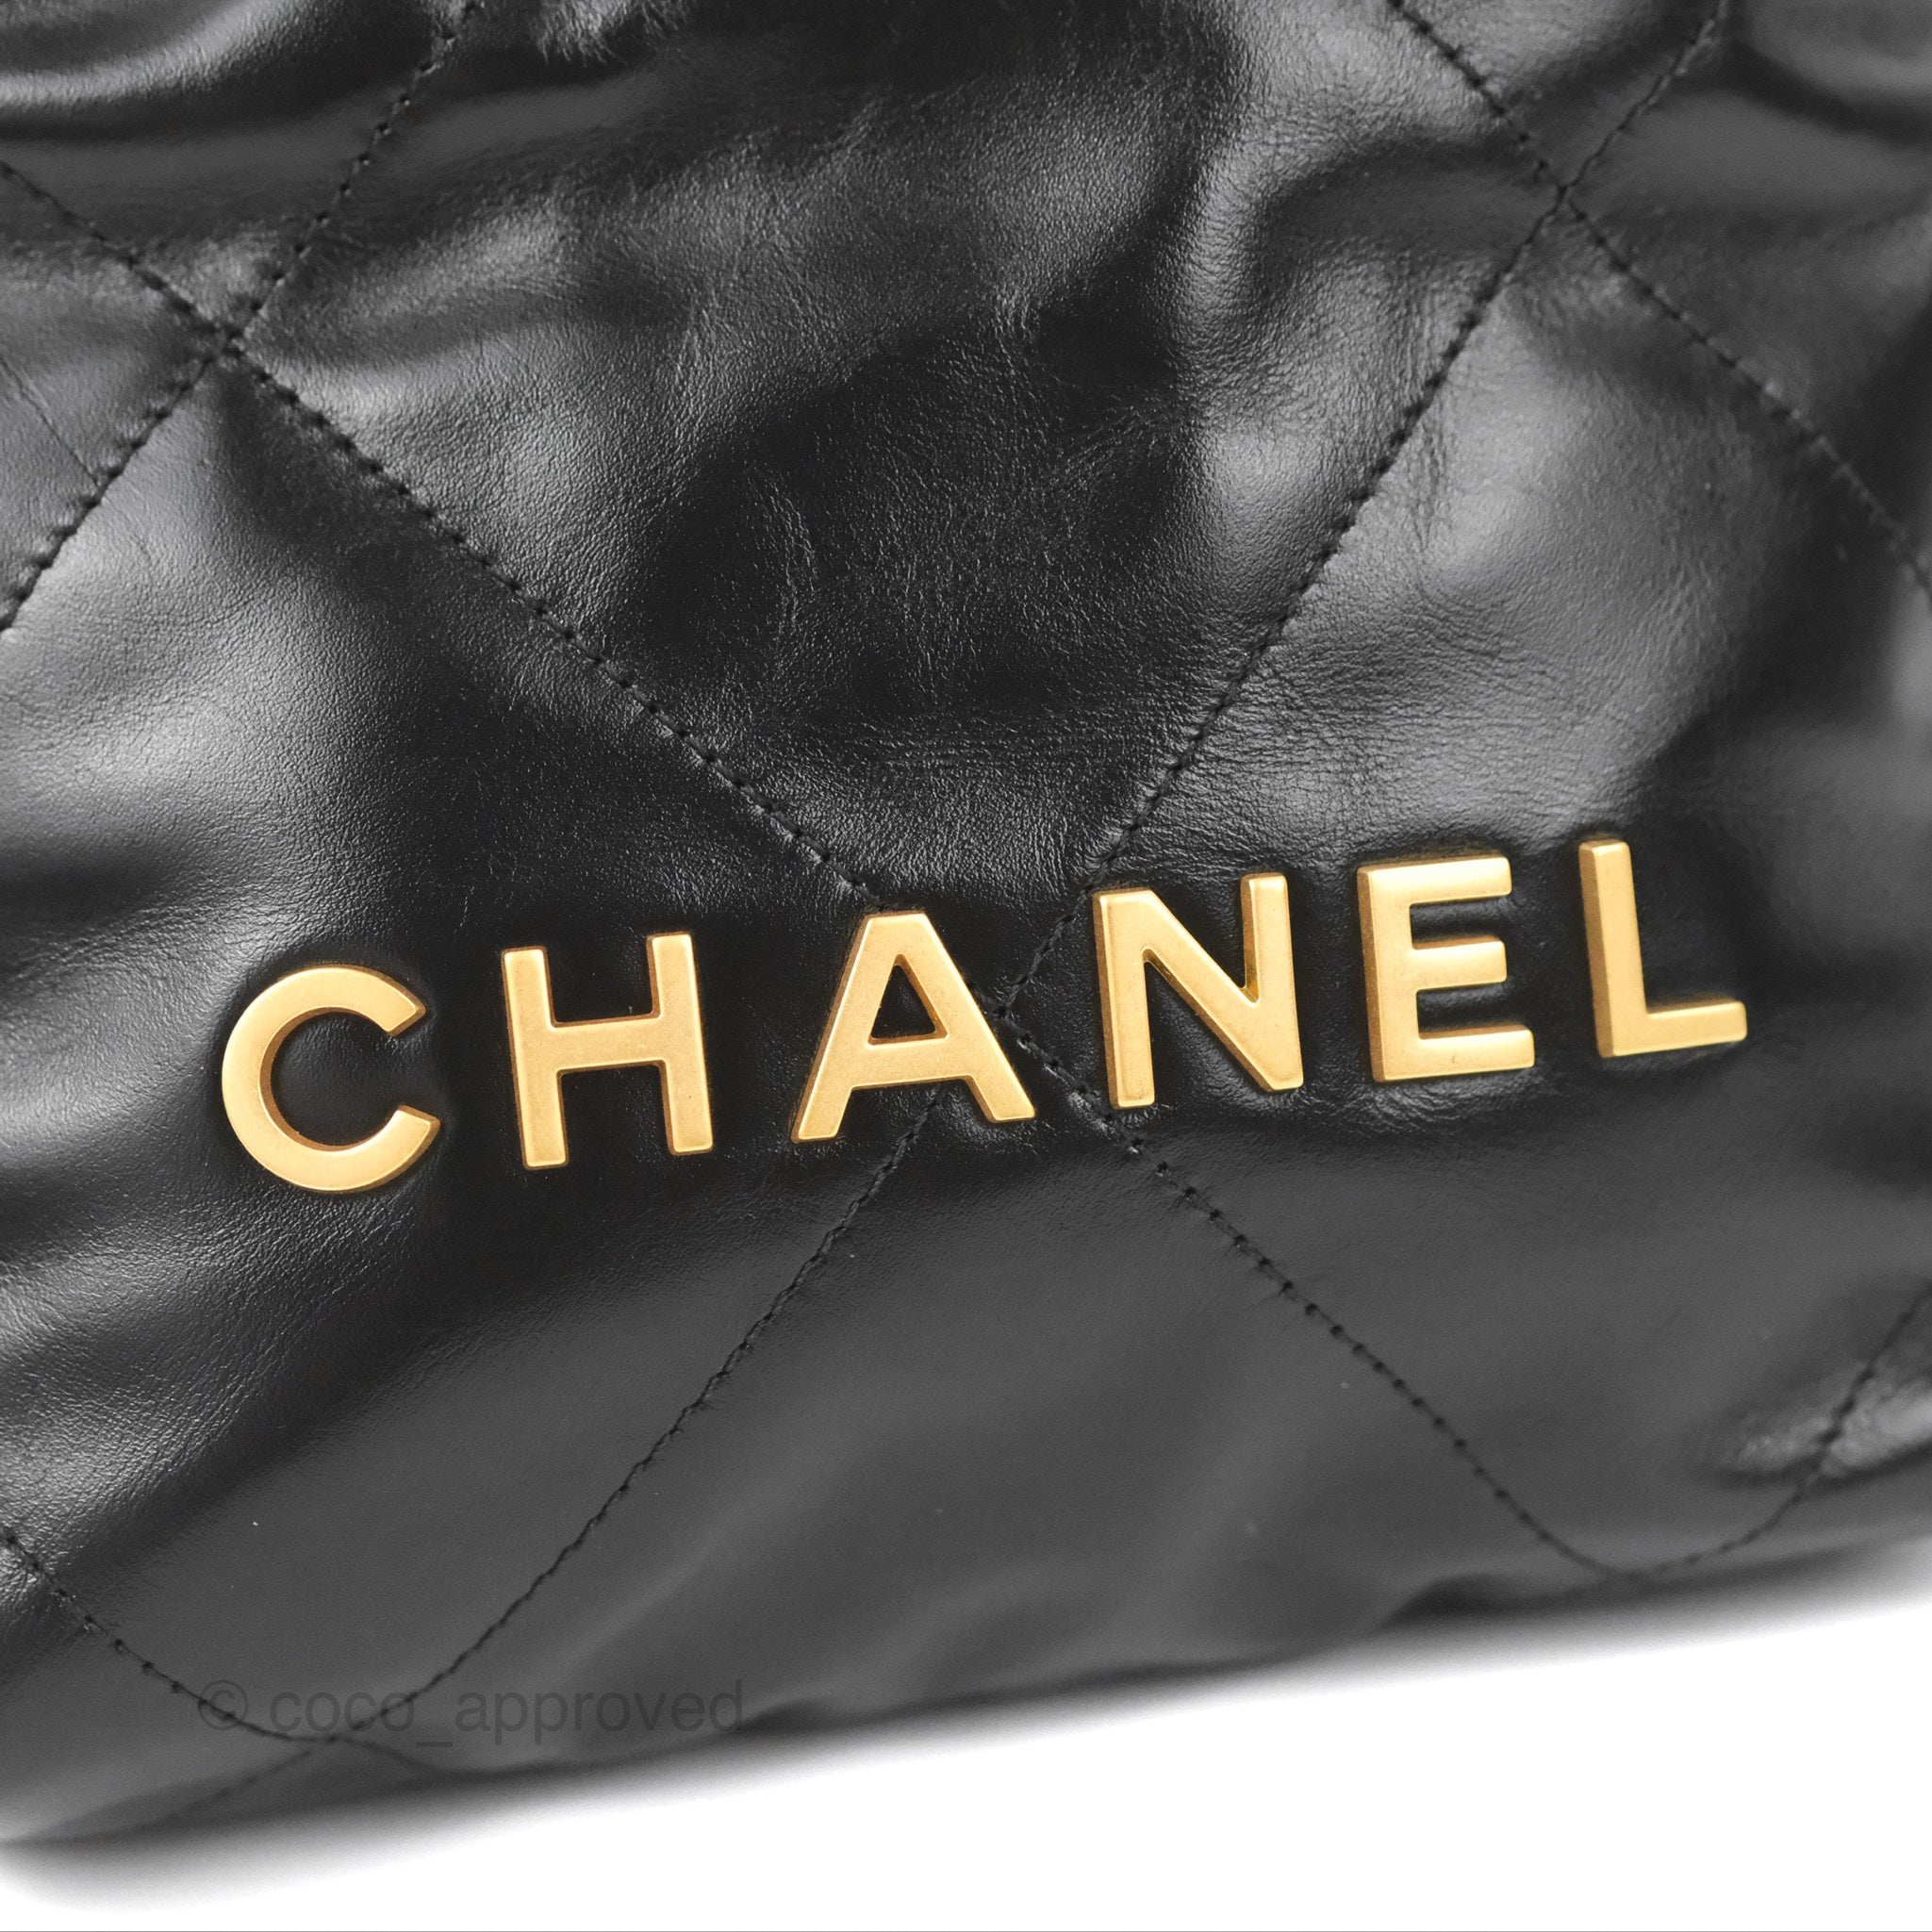 Chanel 22 Bag Review  Chanel's New Style Is Equal Parts Modern